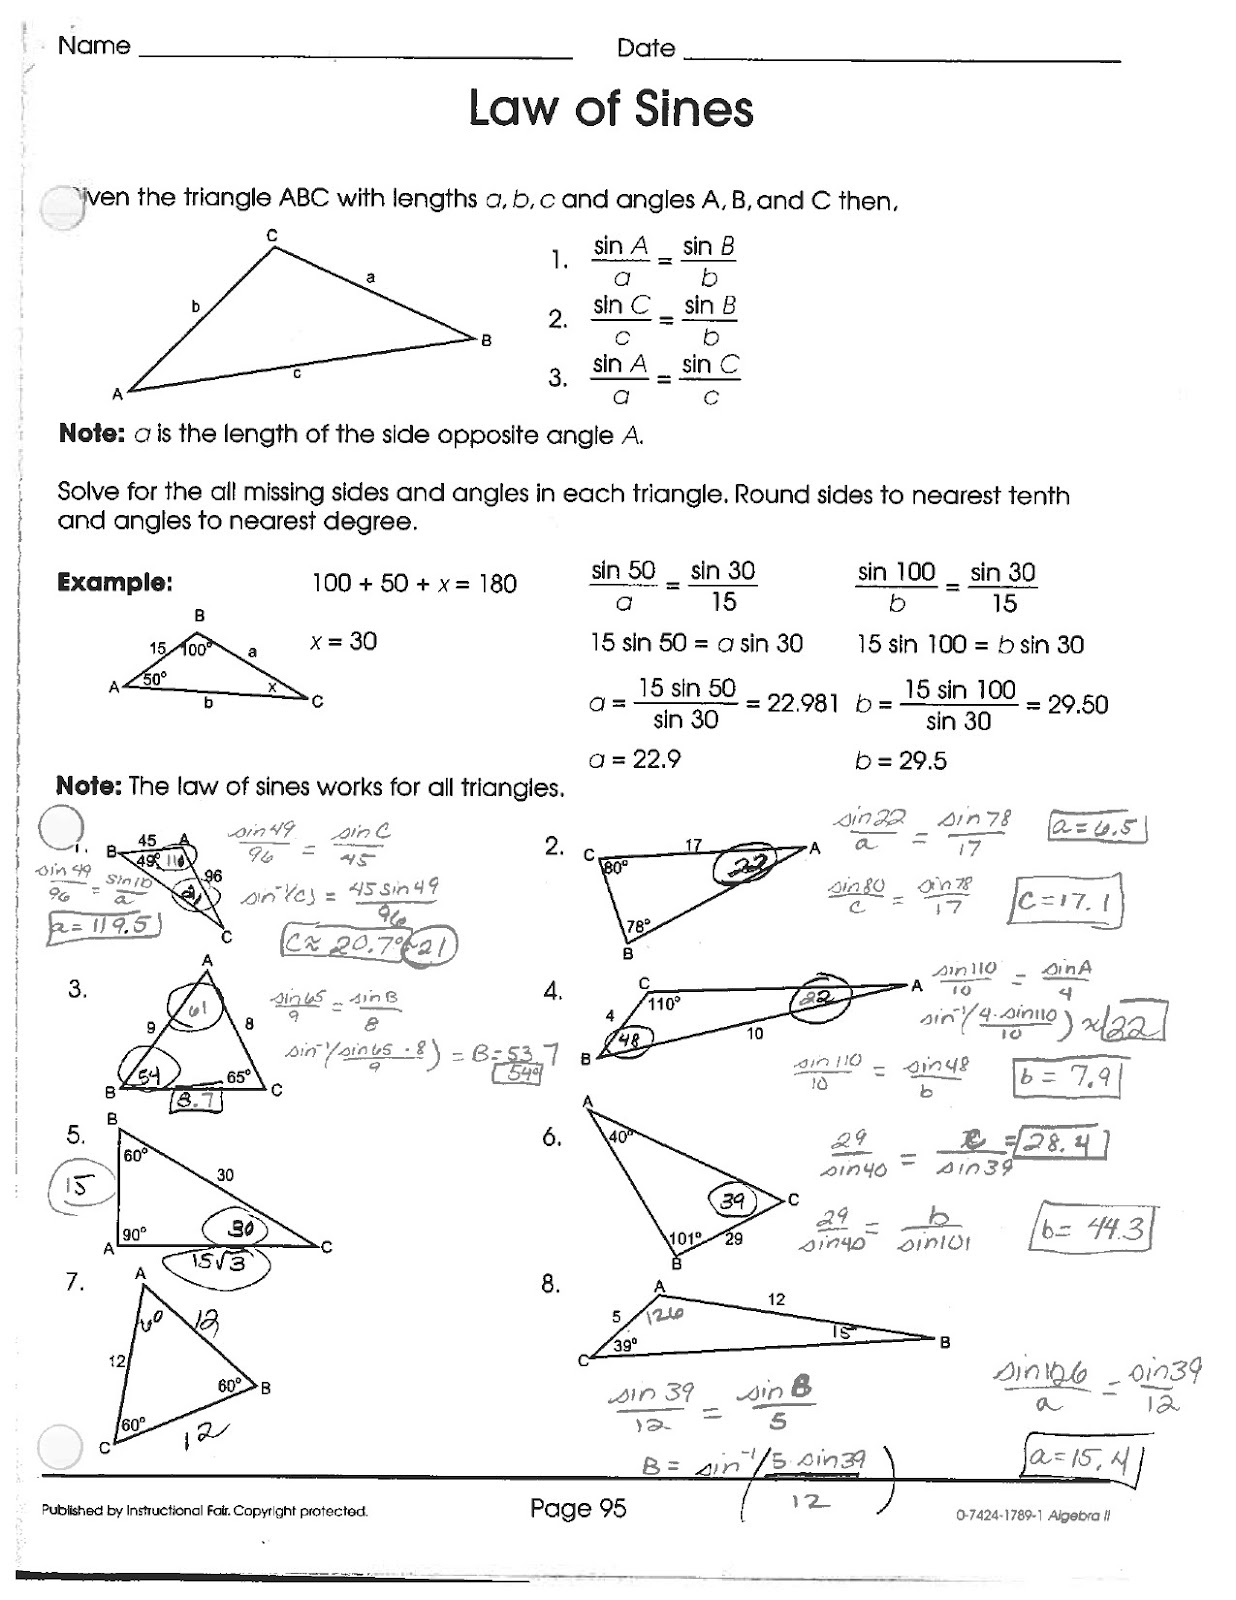 Math Classes Spring 2012 Pre Calc Laws Of Sines And Cosines Worksheet